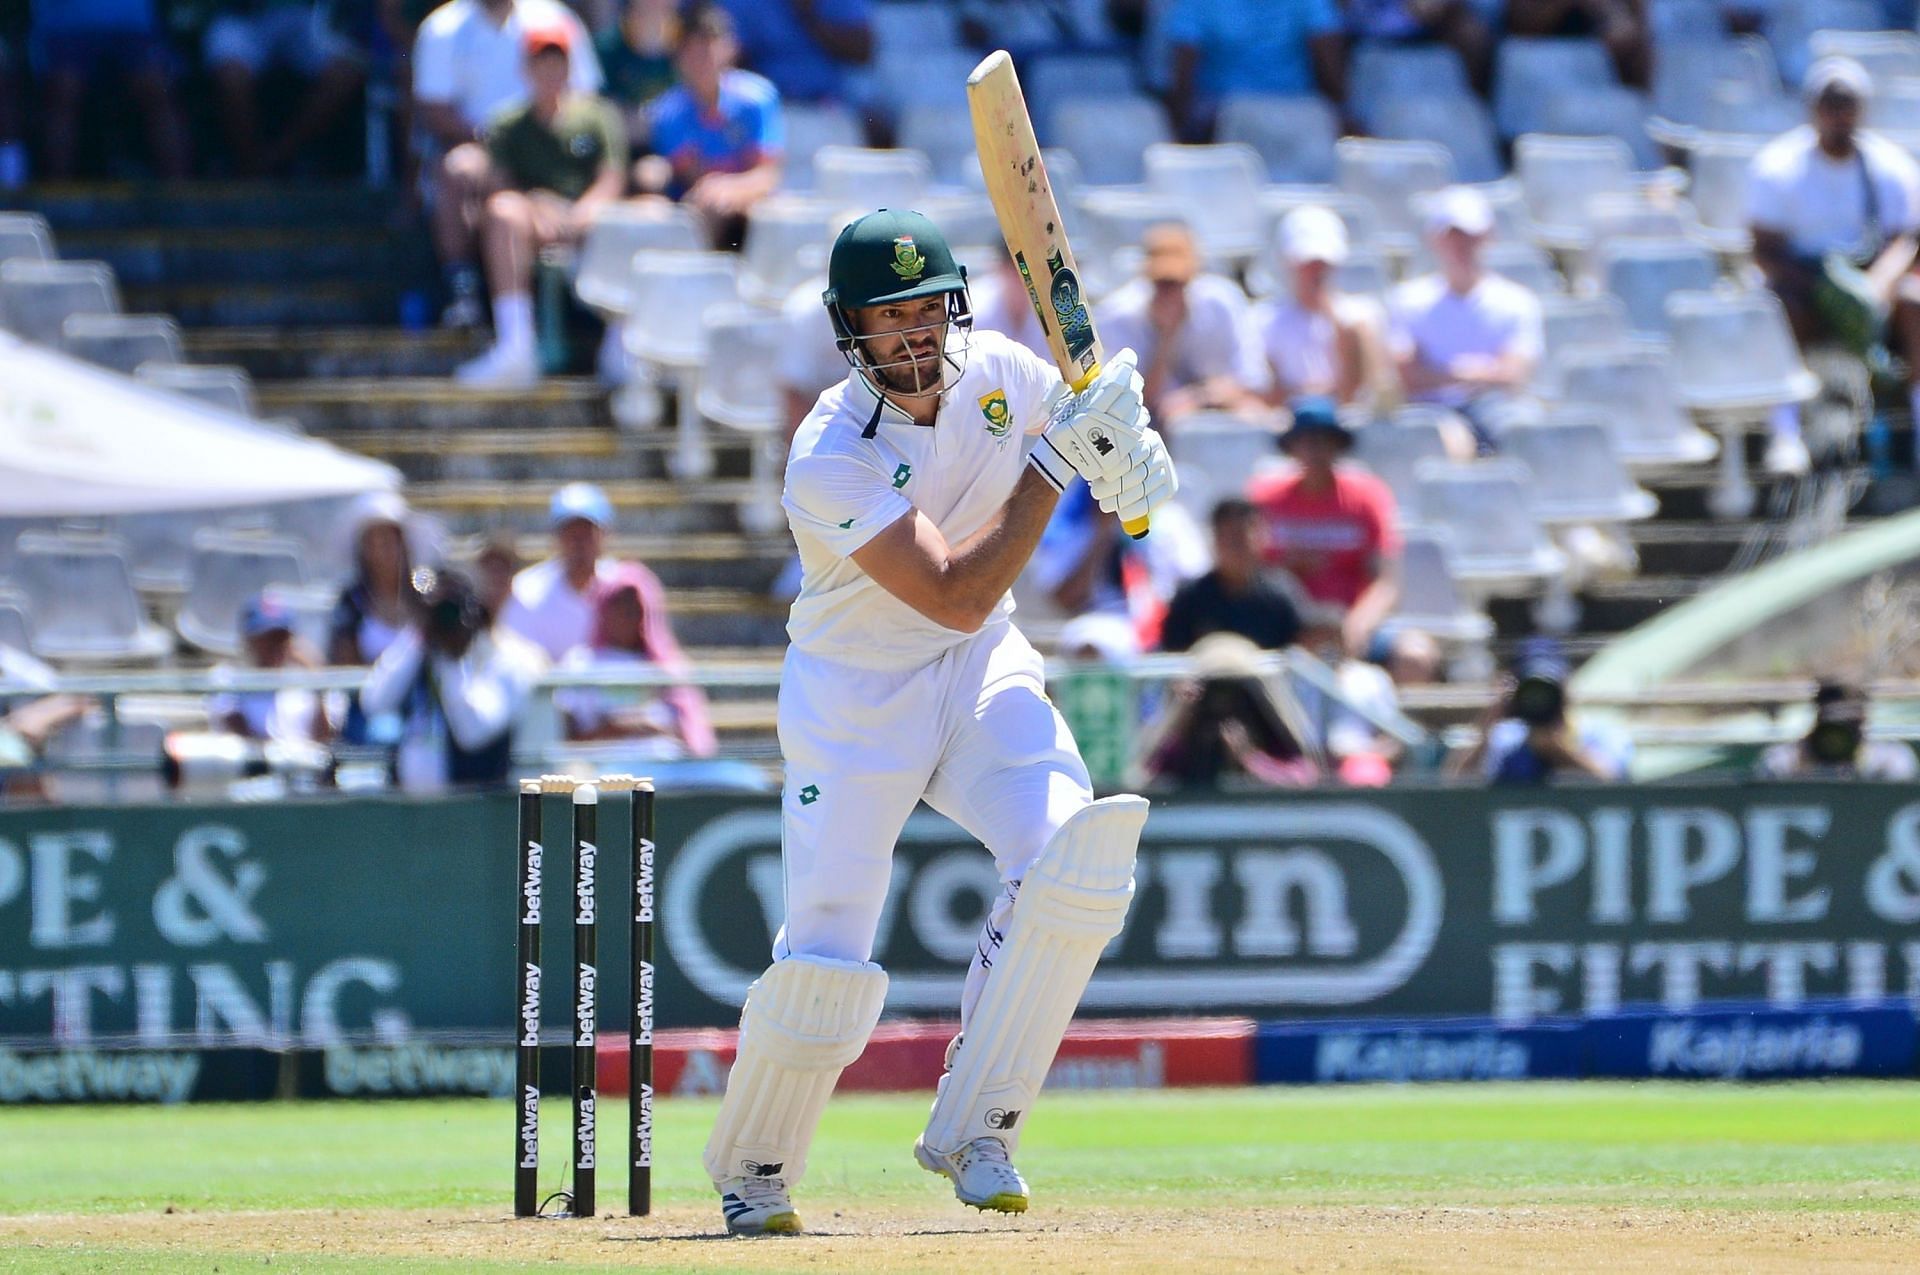 Aiden Markram struck a superb hundred in Cape Town. (Pic: Getty Images)